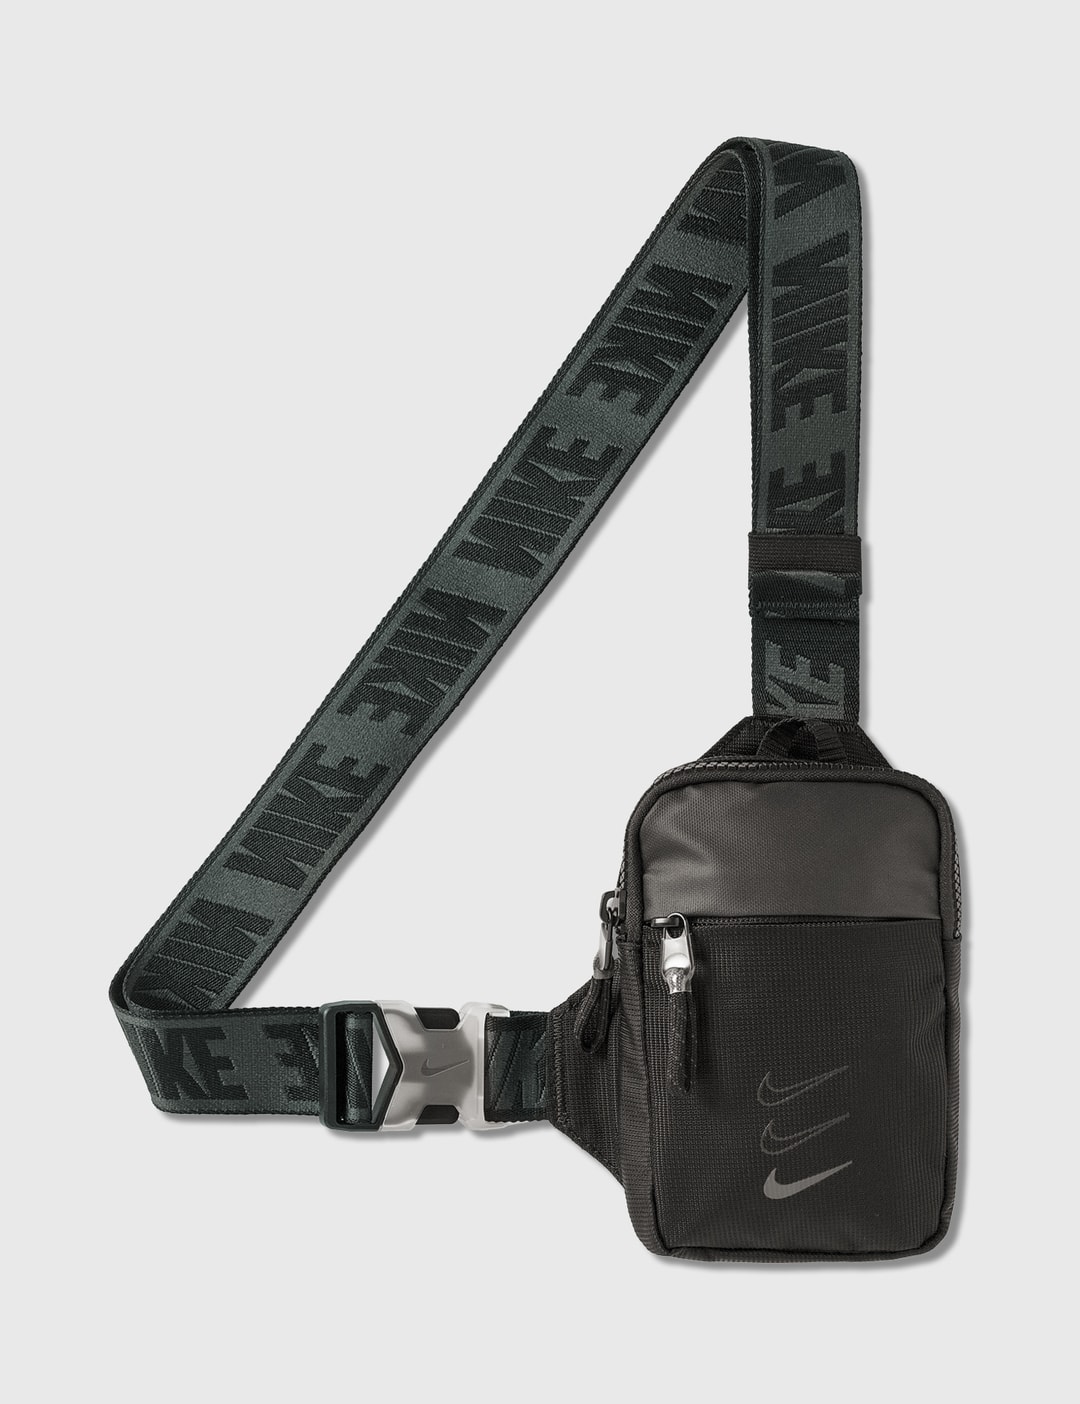 Aanbeveling Zeemeeuw Verwisselbaar Nike - Nike Sportswear Essentials Small Hip Pack | HBX - Globally Curated  Fashion and Lifestyle by Hypebeast